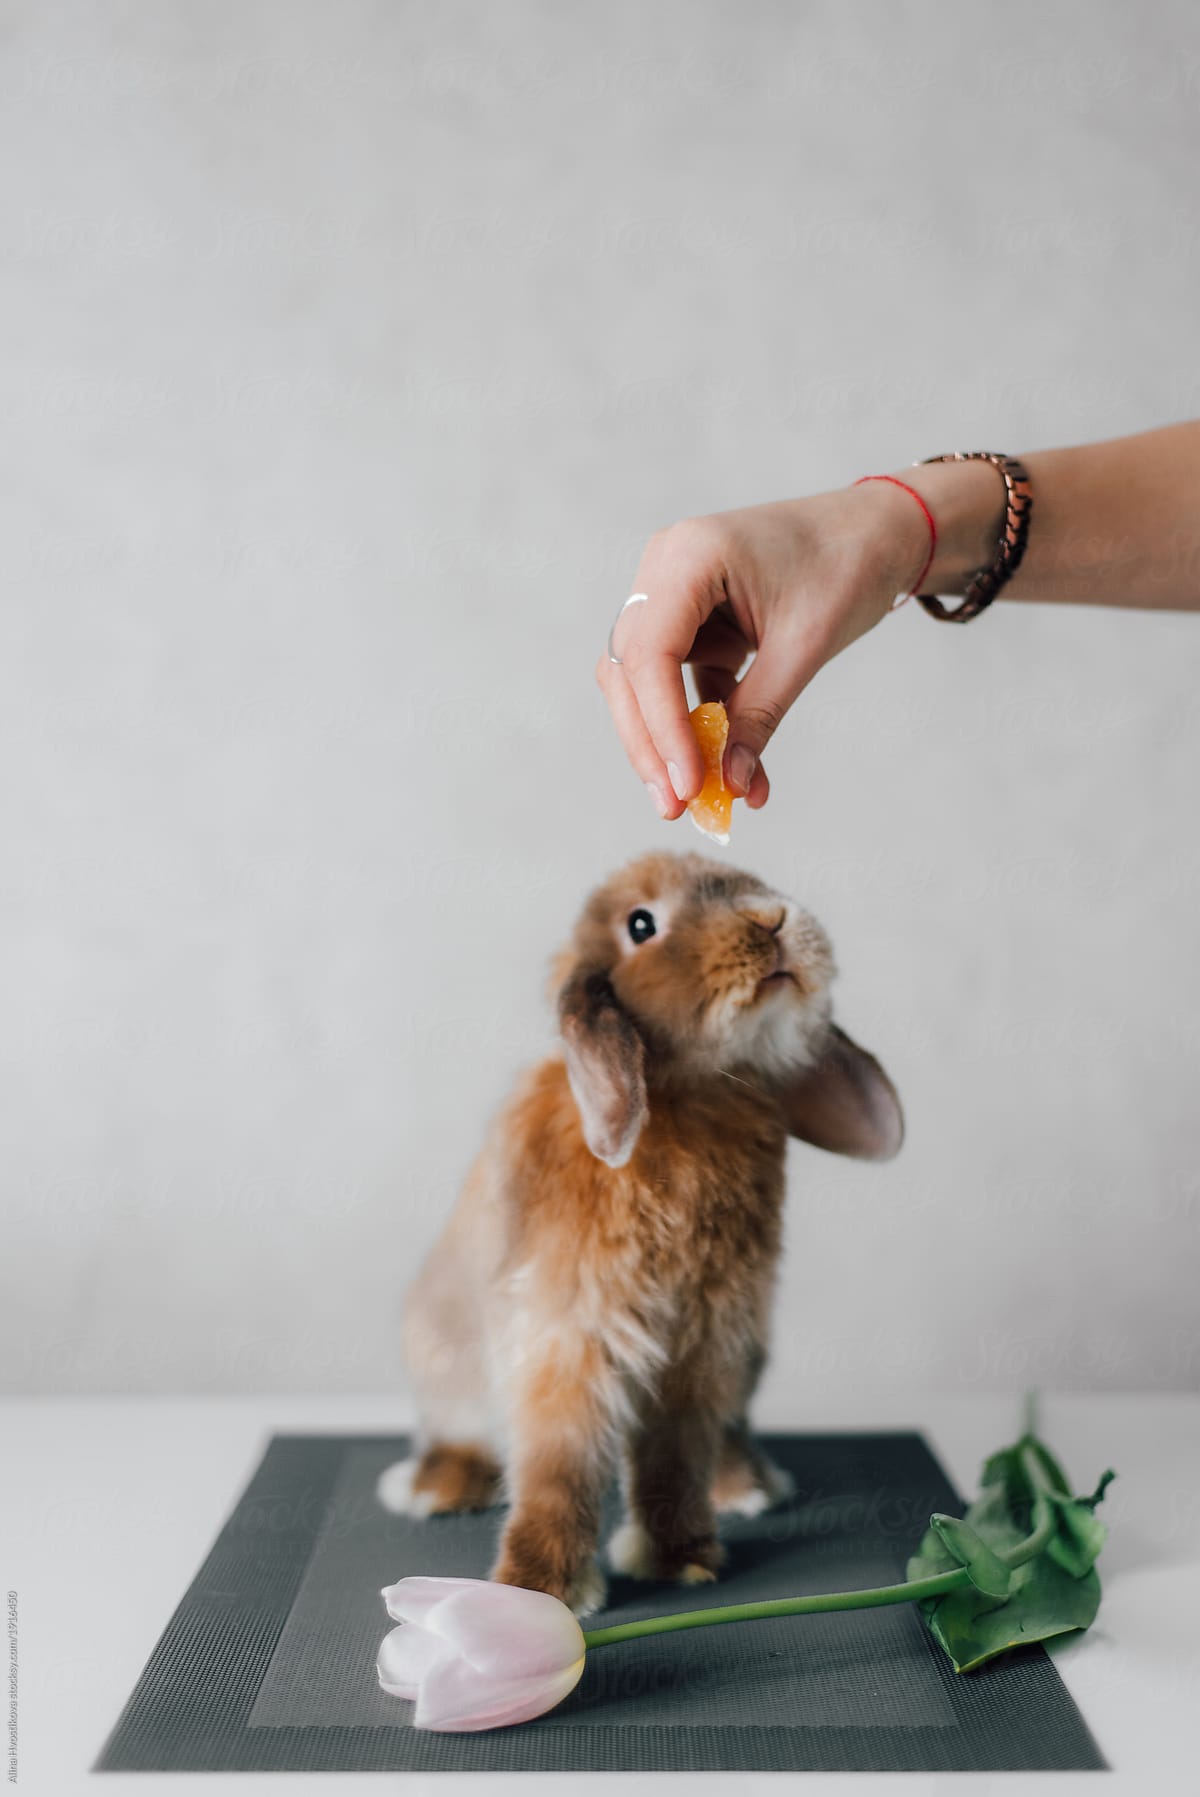 Woman feeding hare with carrot